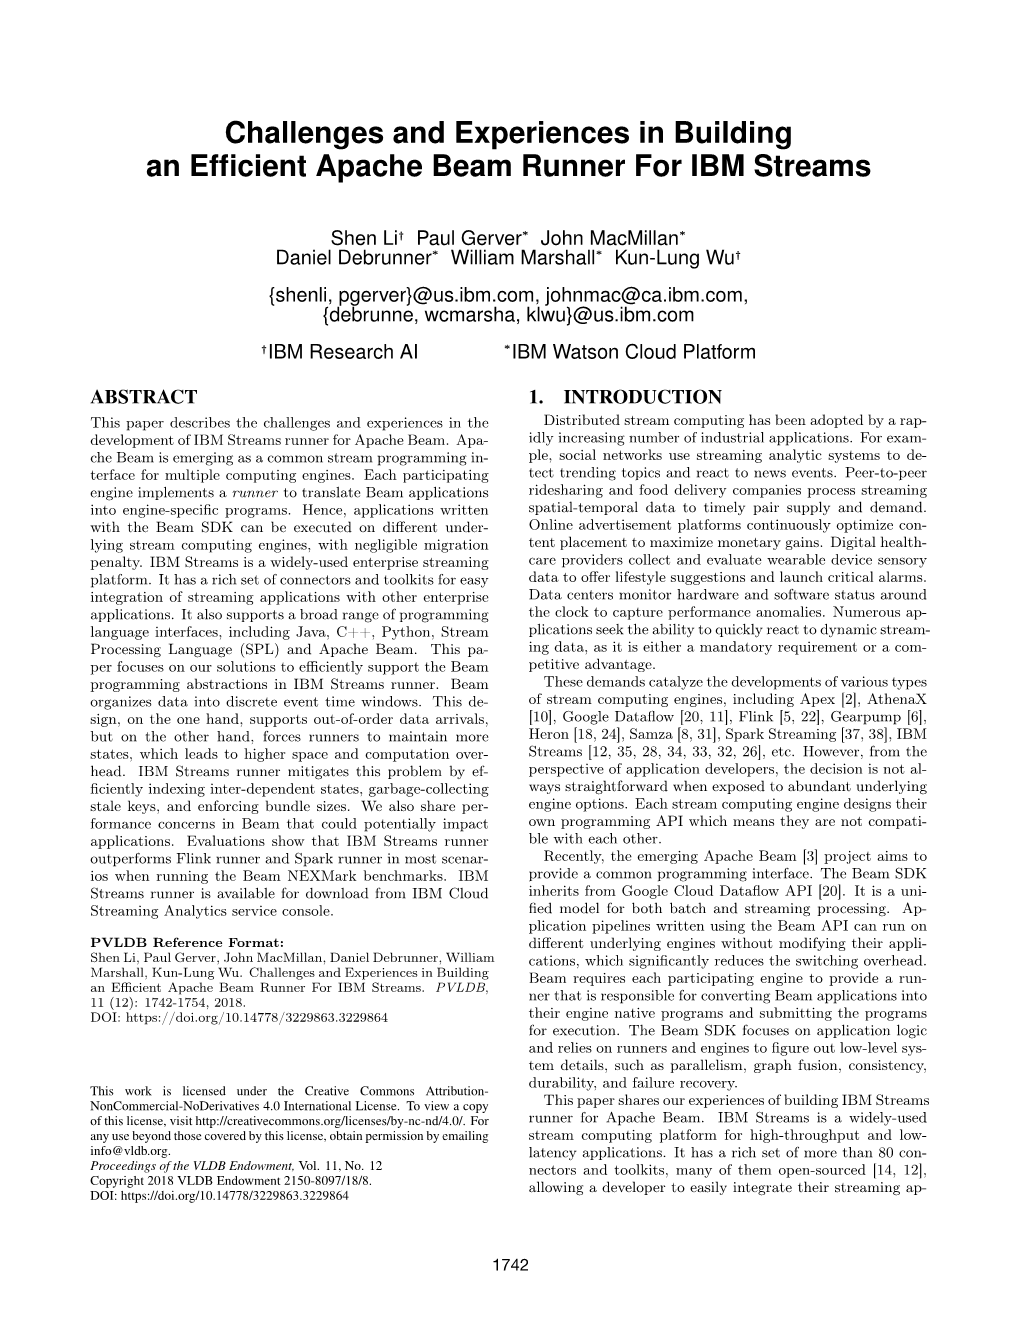 Challenges and Experiences in Building an Efficient Apache Beam